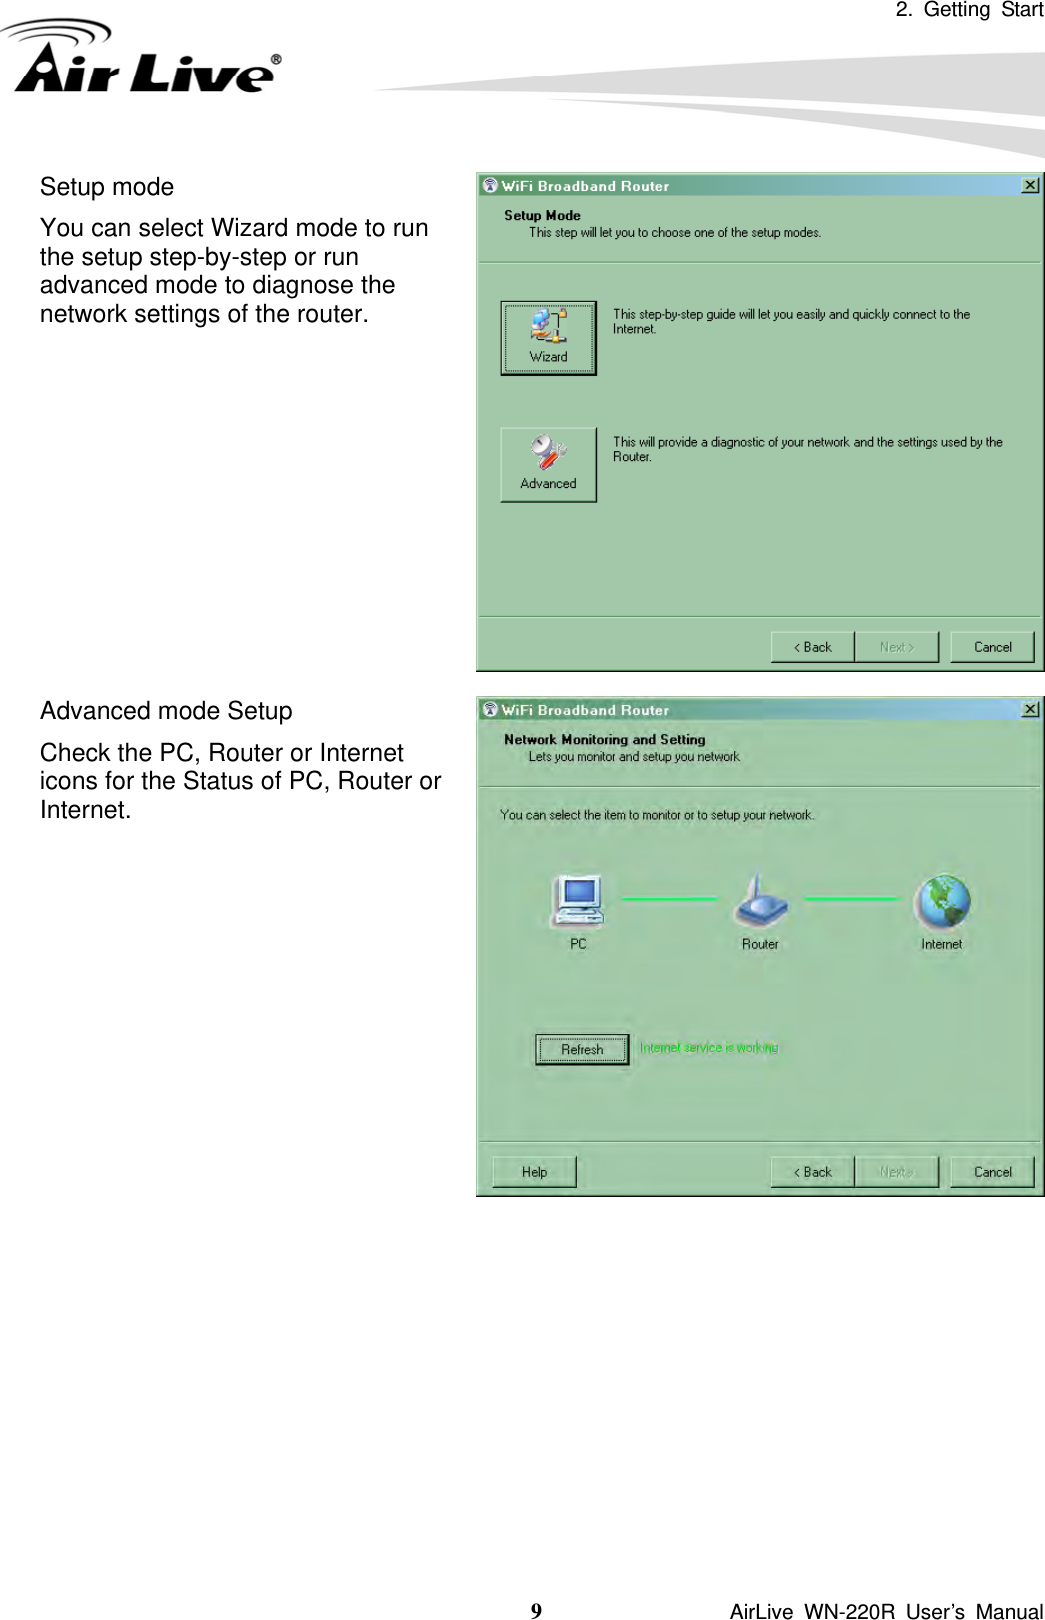 2. Getting Start 9               AirLive WN-220R User’s Manual Setup mode You can select Wizard mode to run the setup step-by-step or run advanced mode to diagnose the network settings of the router.  Advanced mode Setup Check the PC, Router or Internet icons for the Status of PC, Router or Internet. 